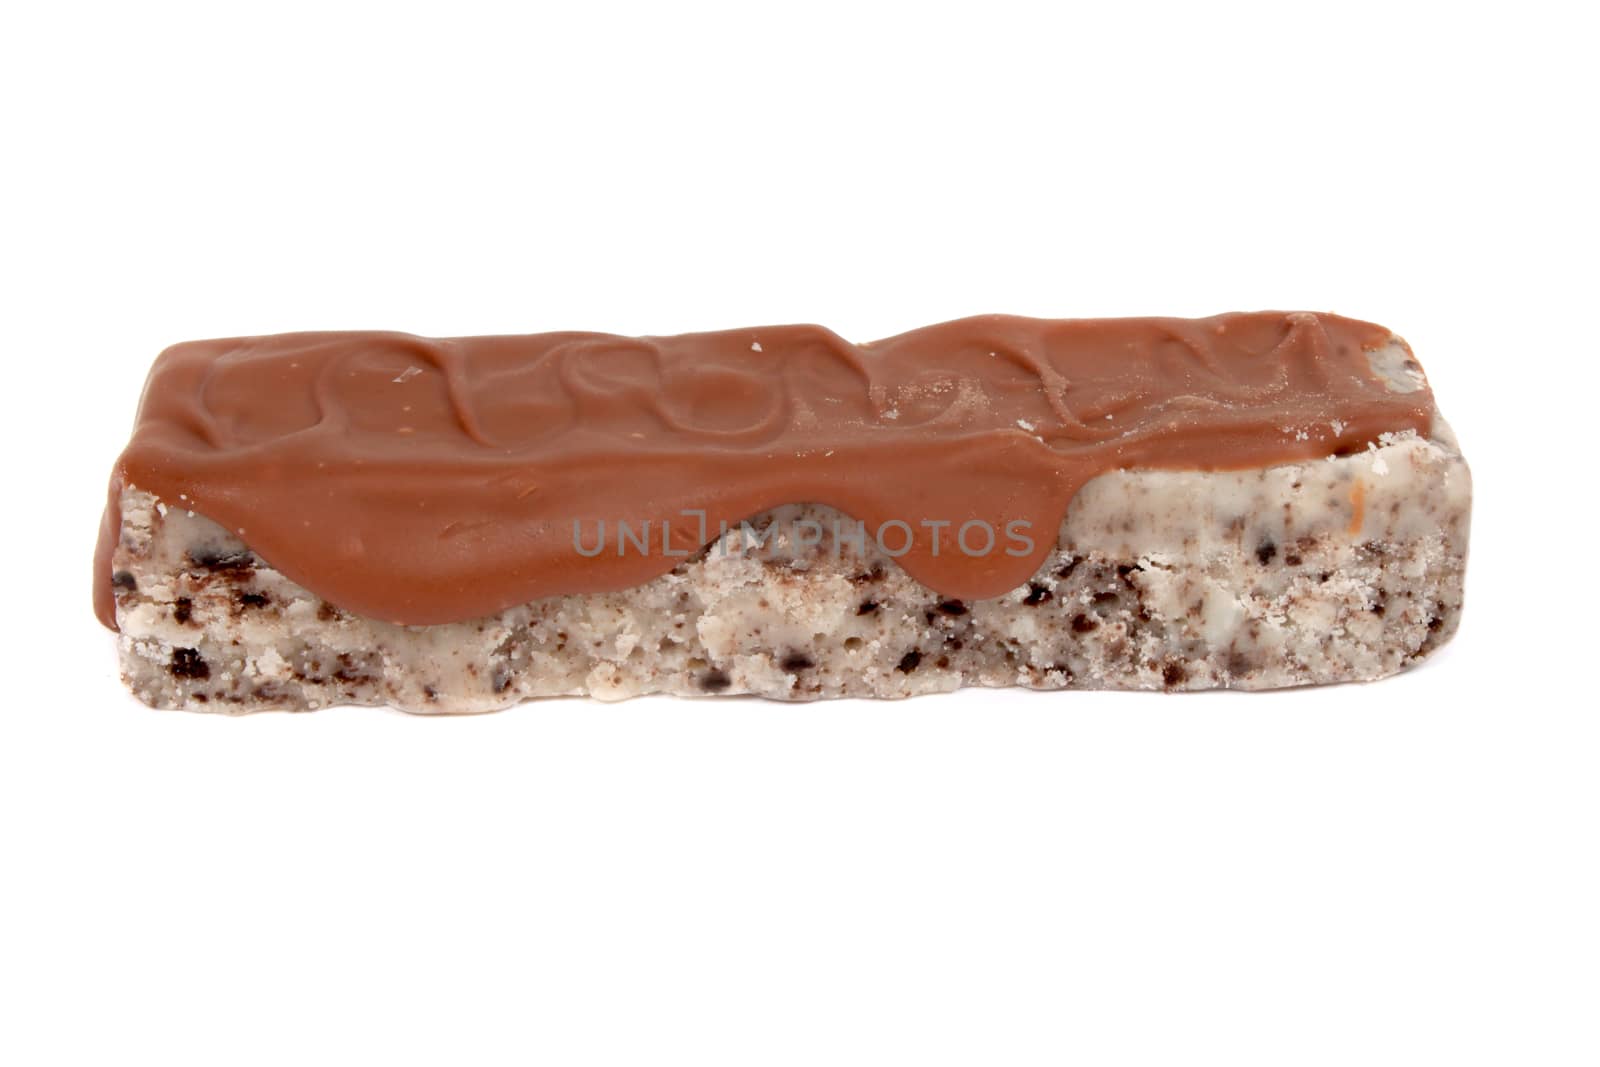 Cookie crumbel fudge bar drizzled with chocolate on a white background